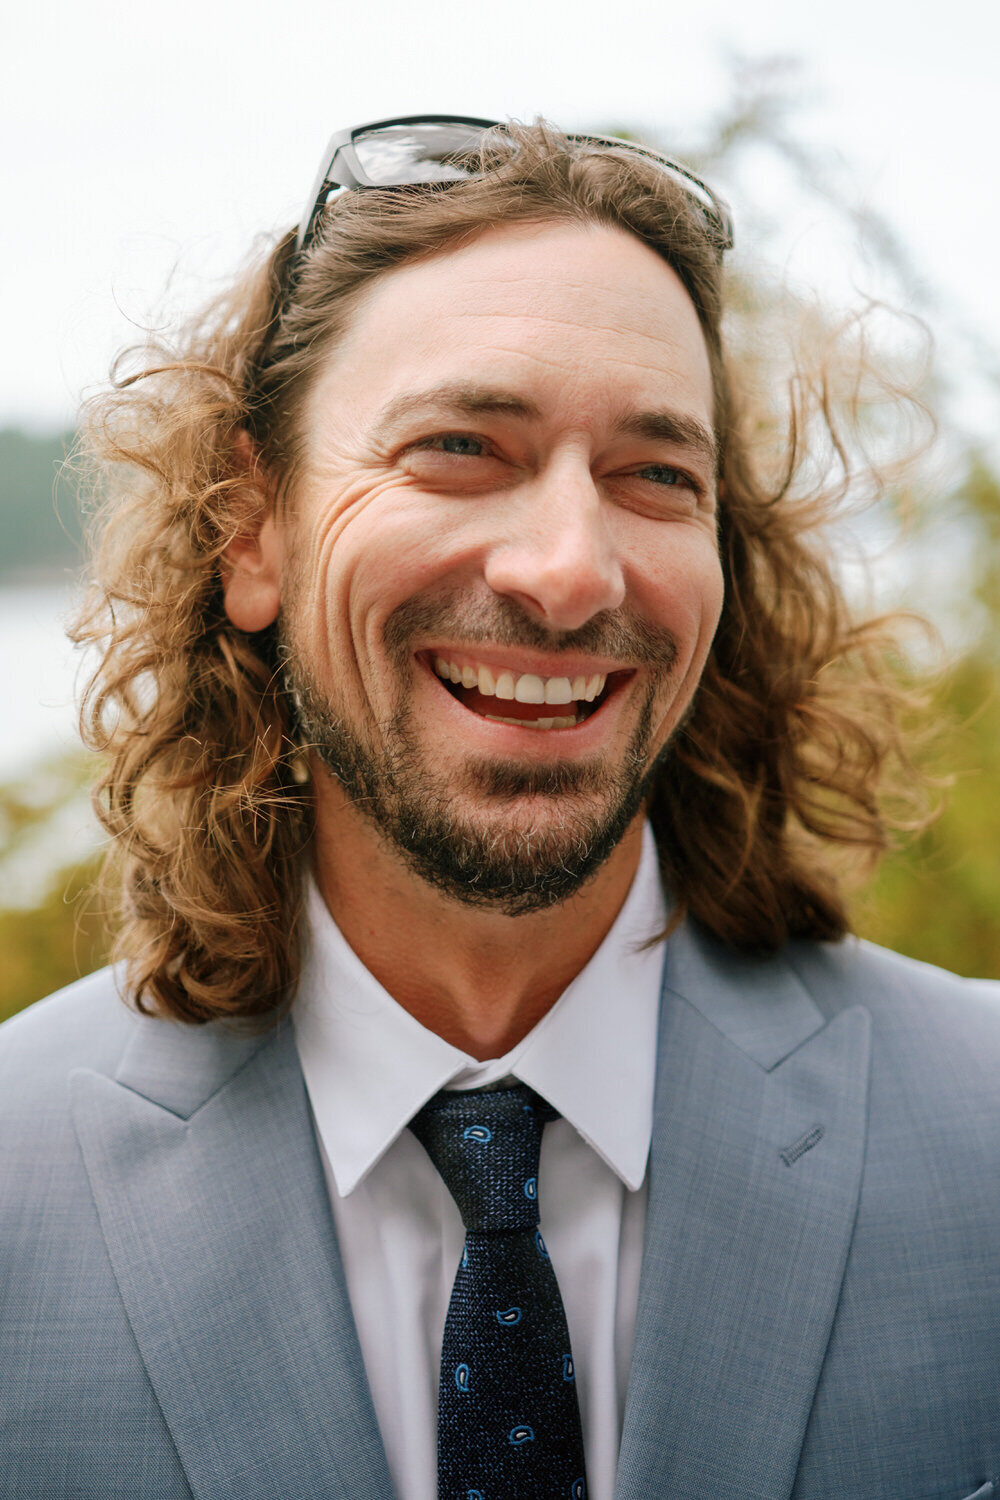 Portrait of a groomsman laughing